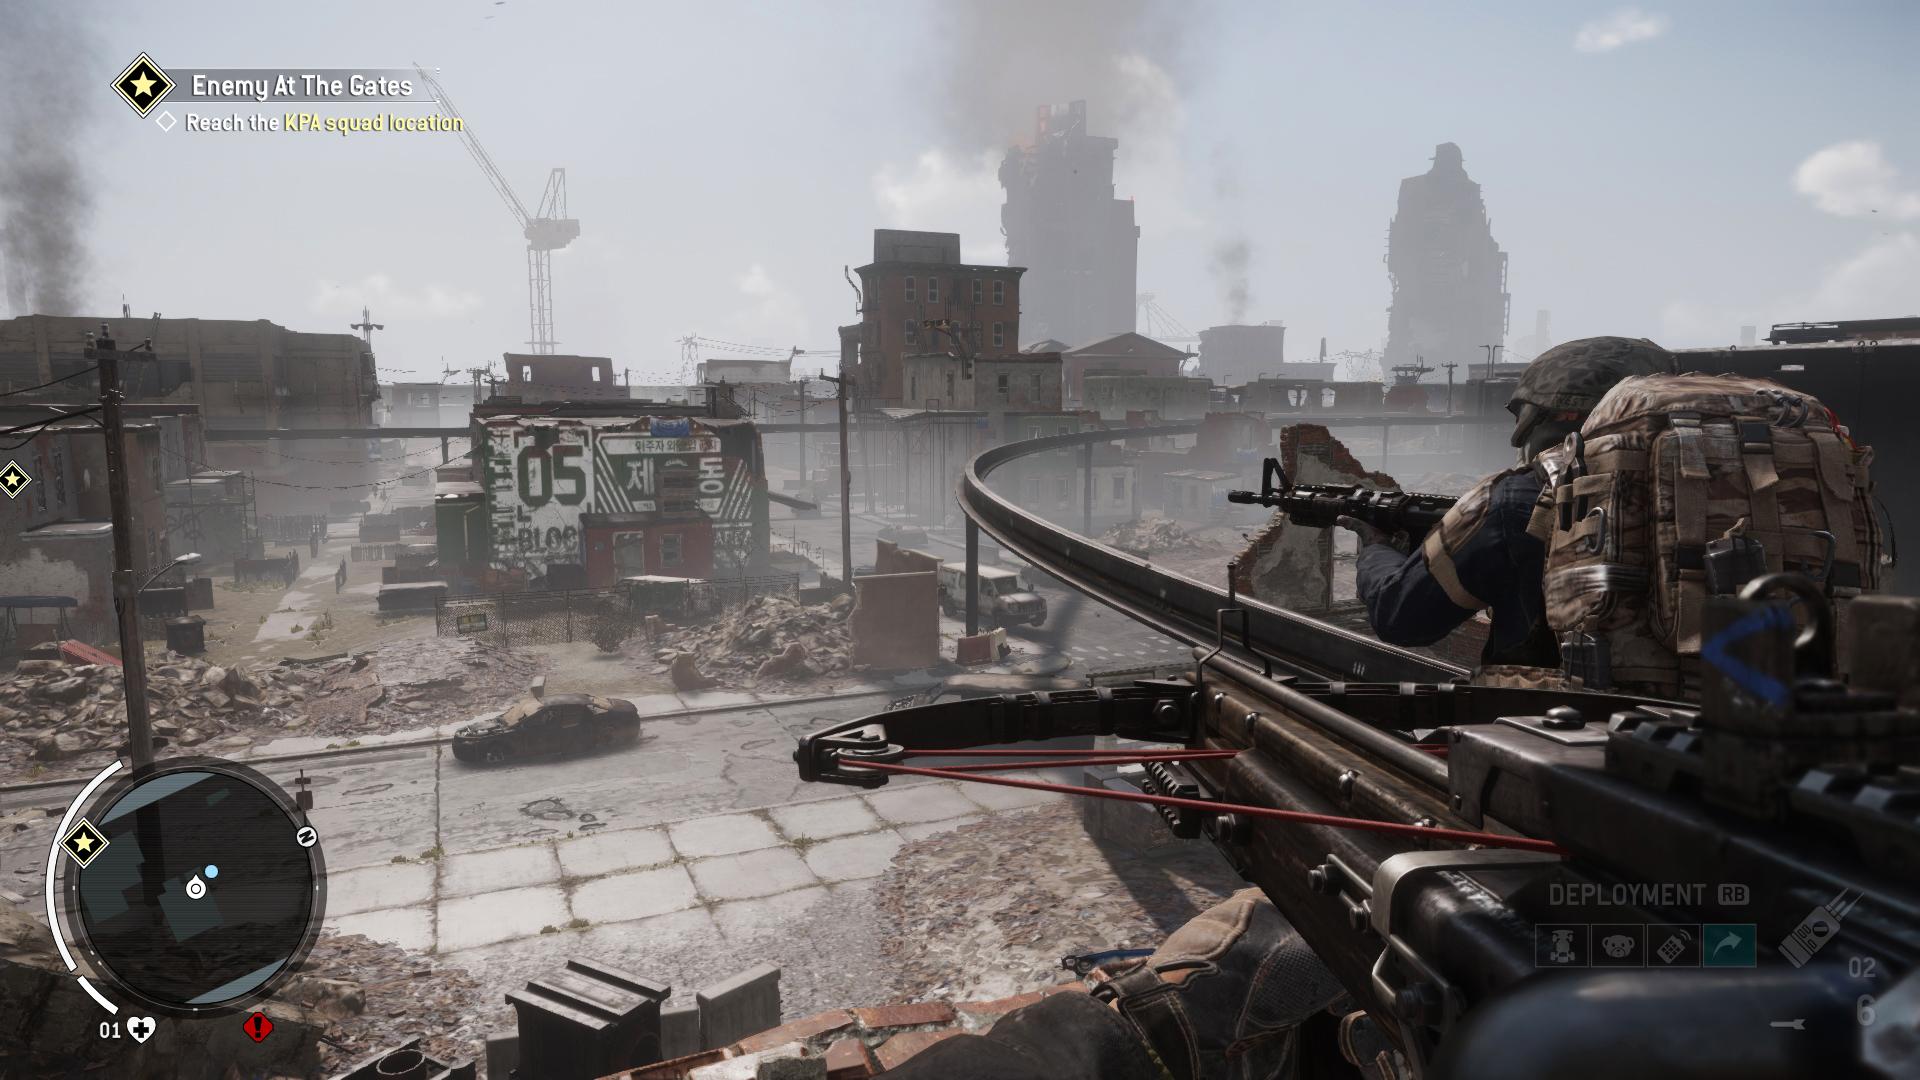 Screenshot №1 from game Homefront®: The Revolution